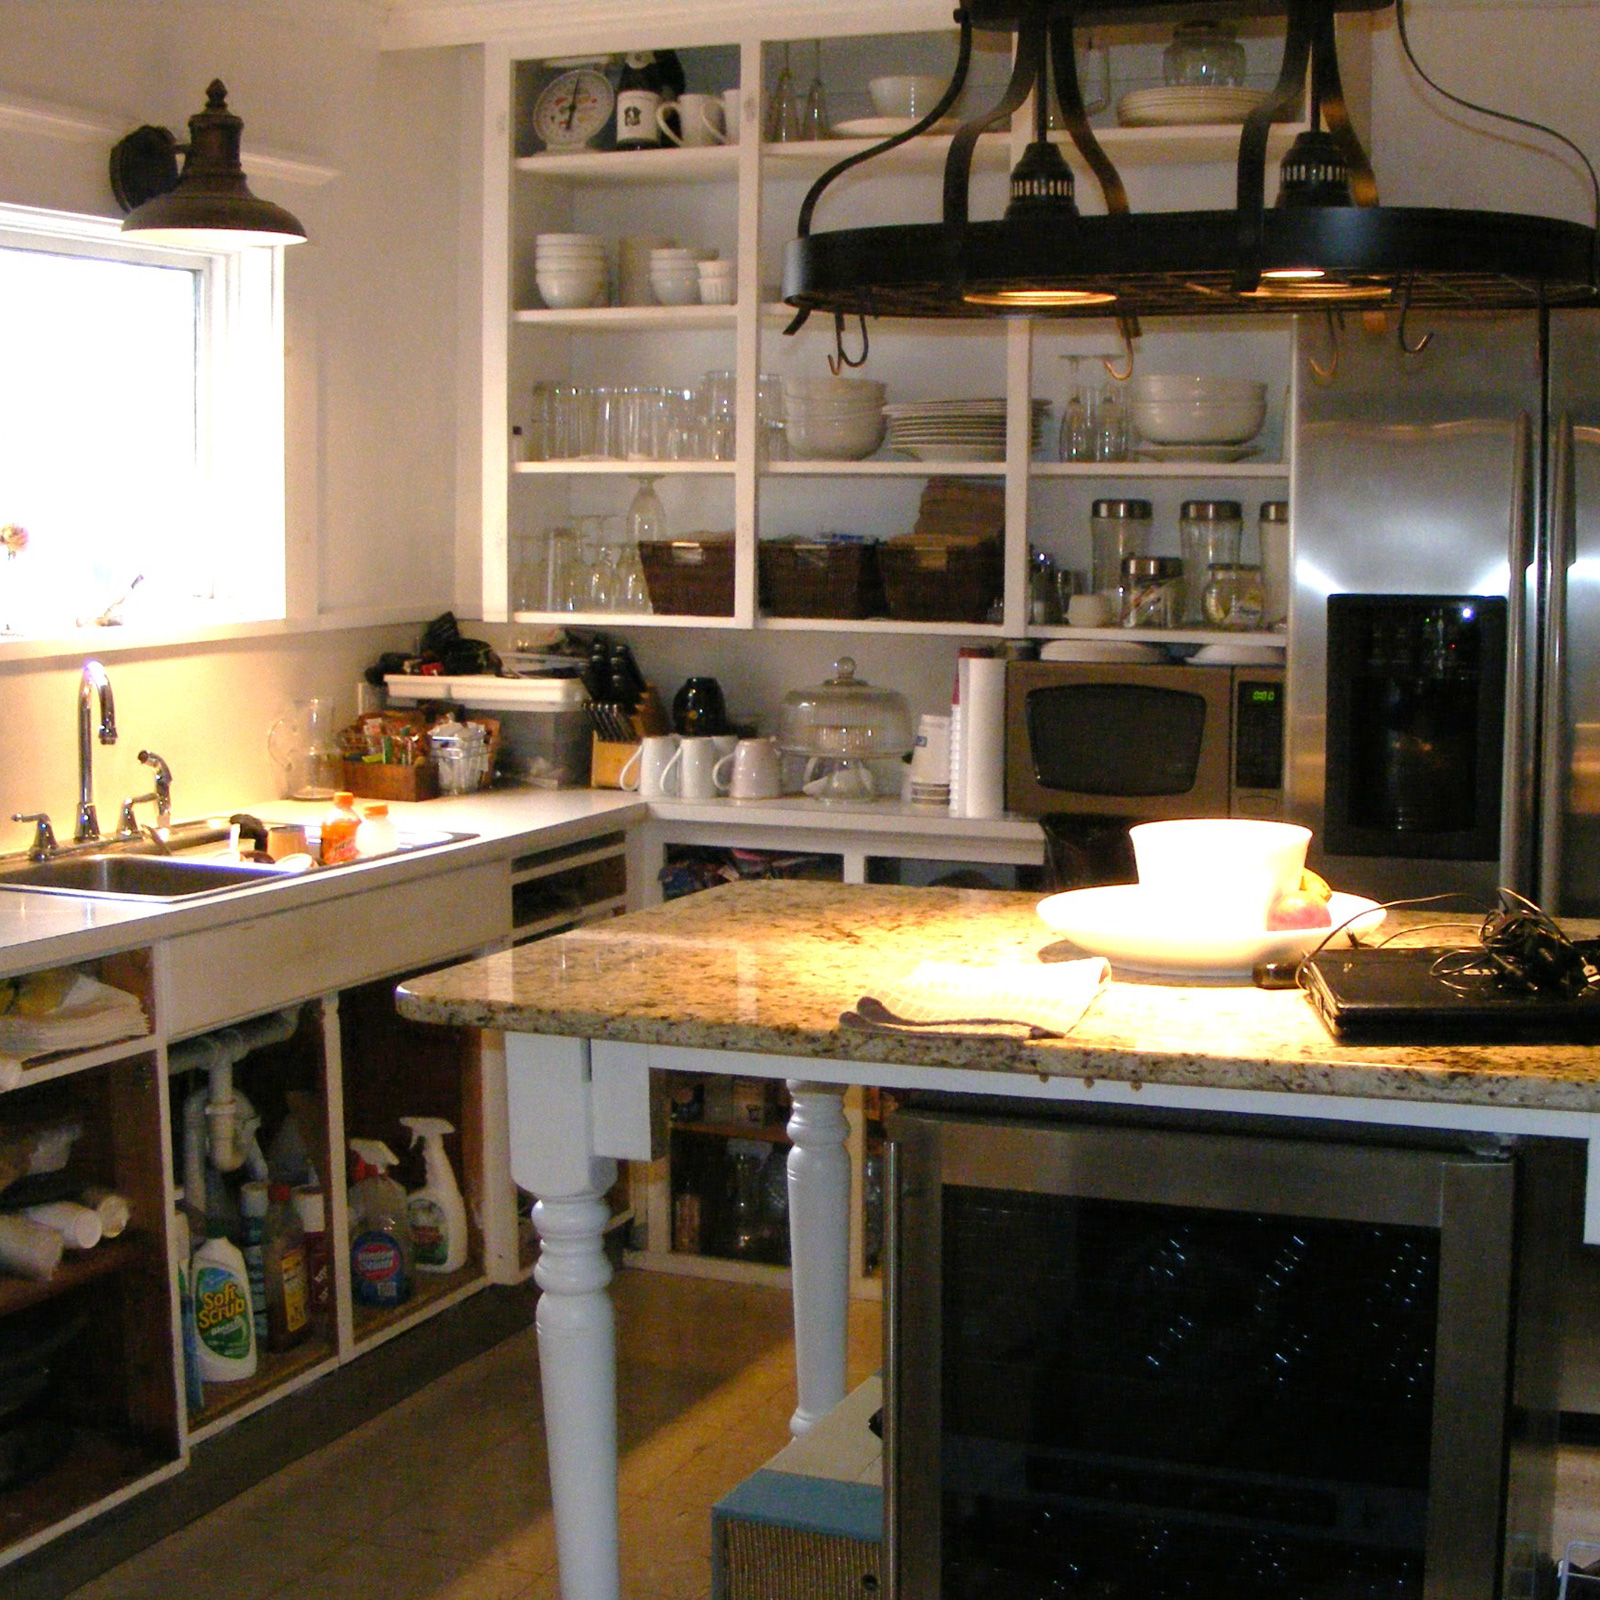 Entry 16 - Missing cabinet doors make this kitchen look messy and disorganized